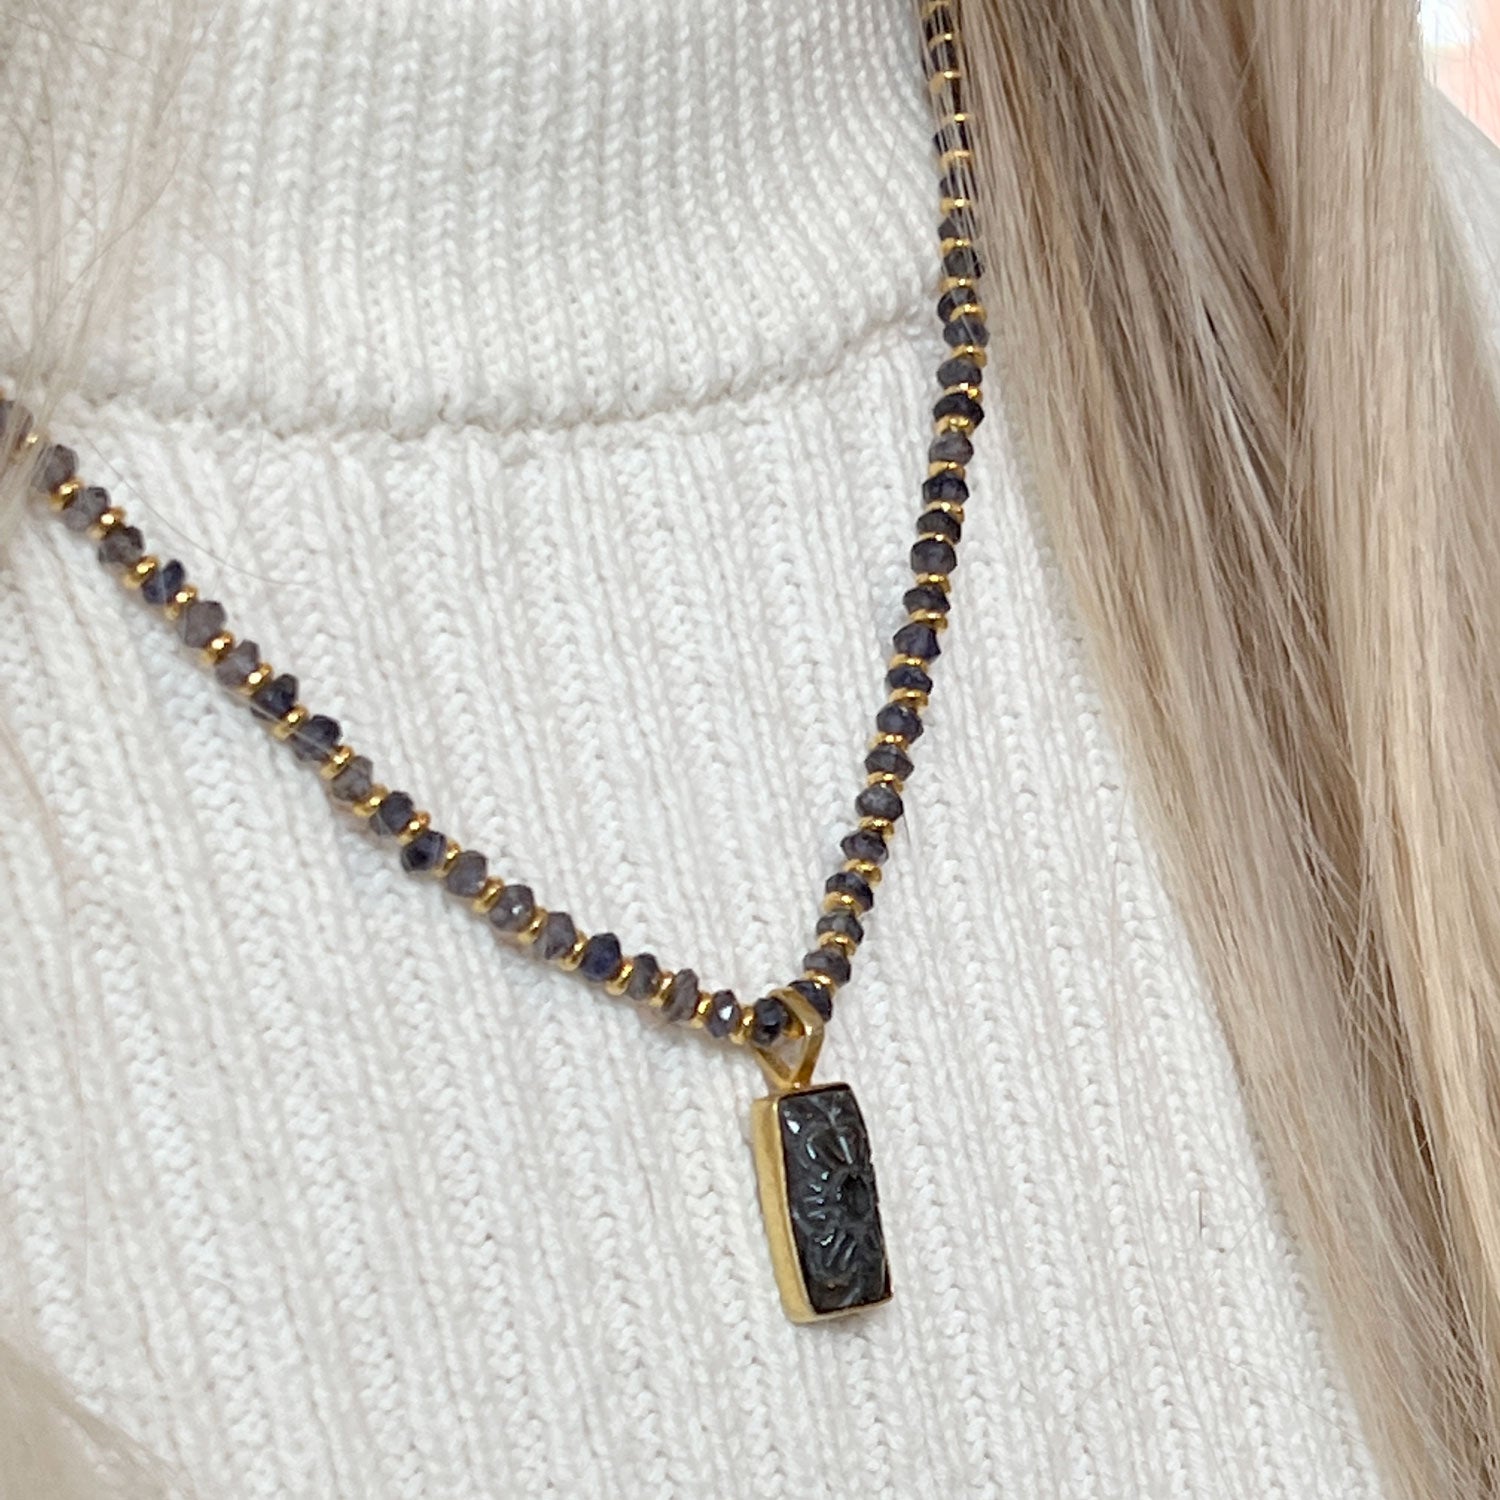 Carved Iolite pendant in Vermeil on Iolite Chain